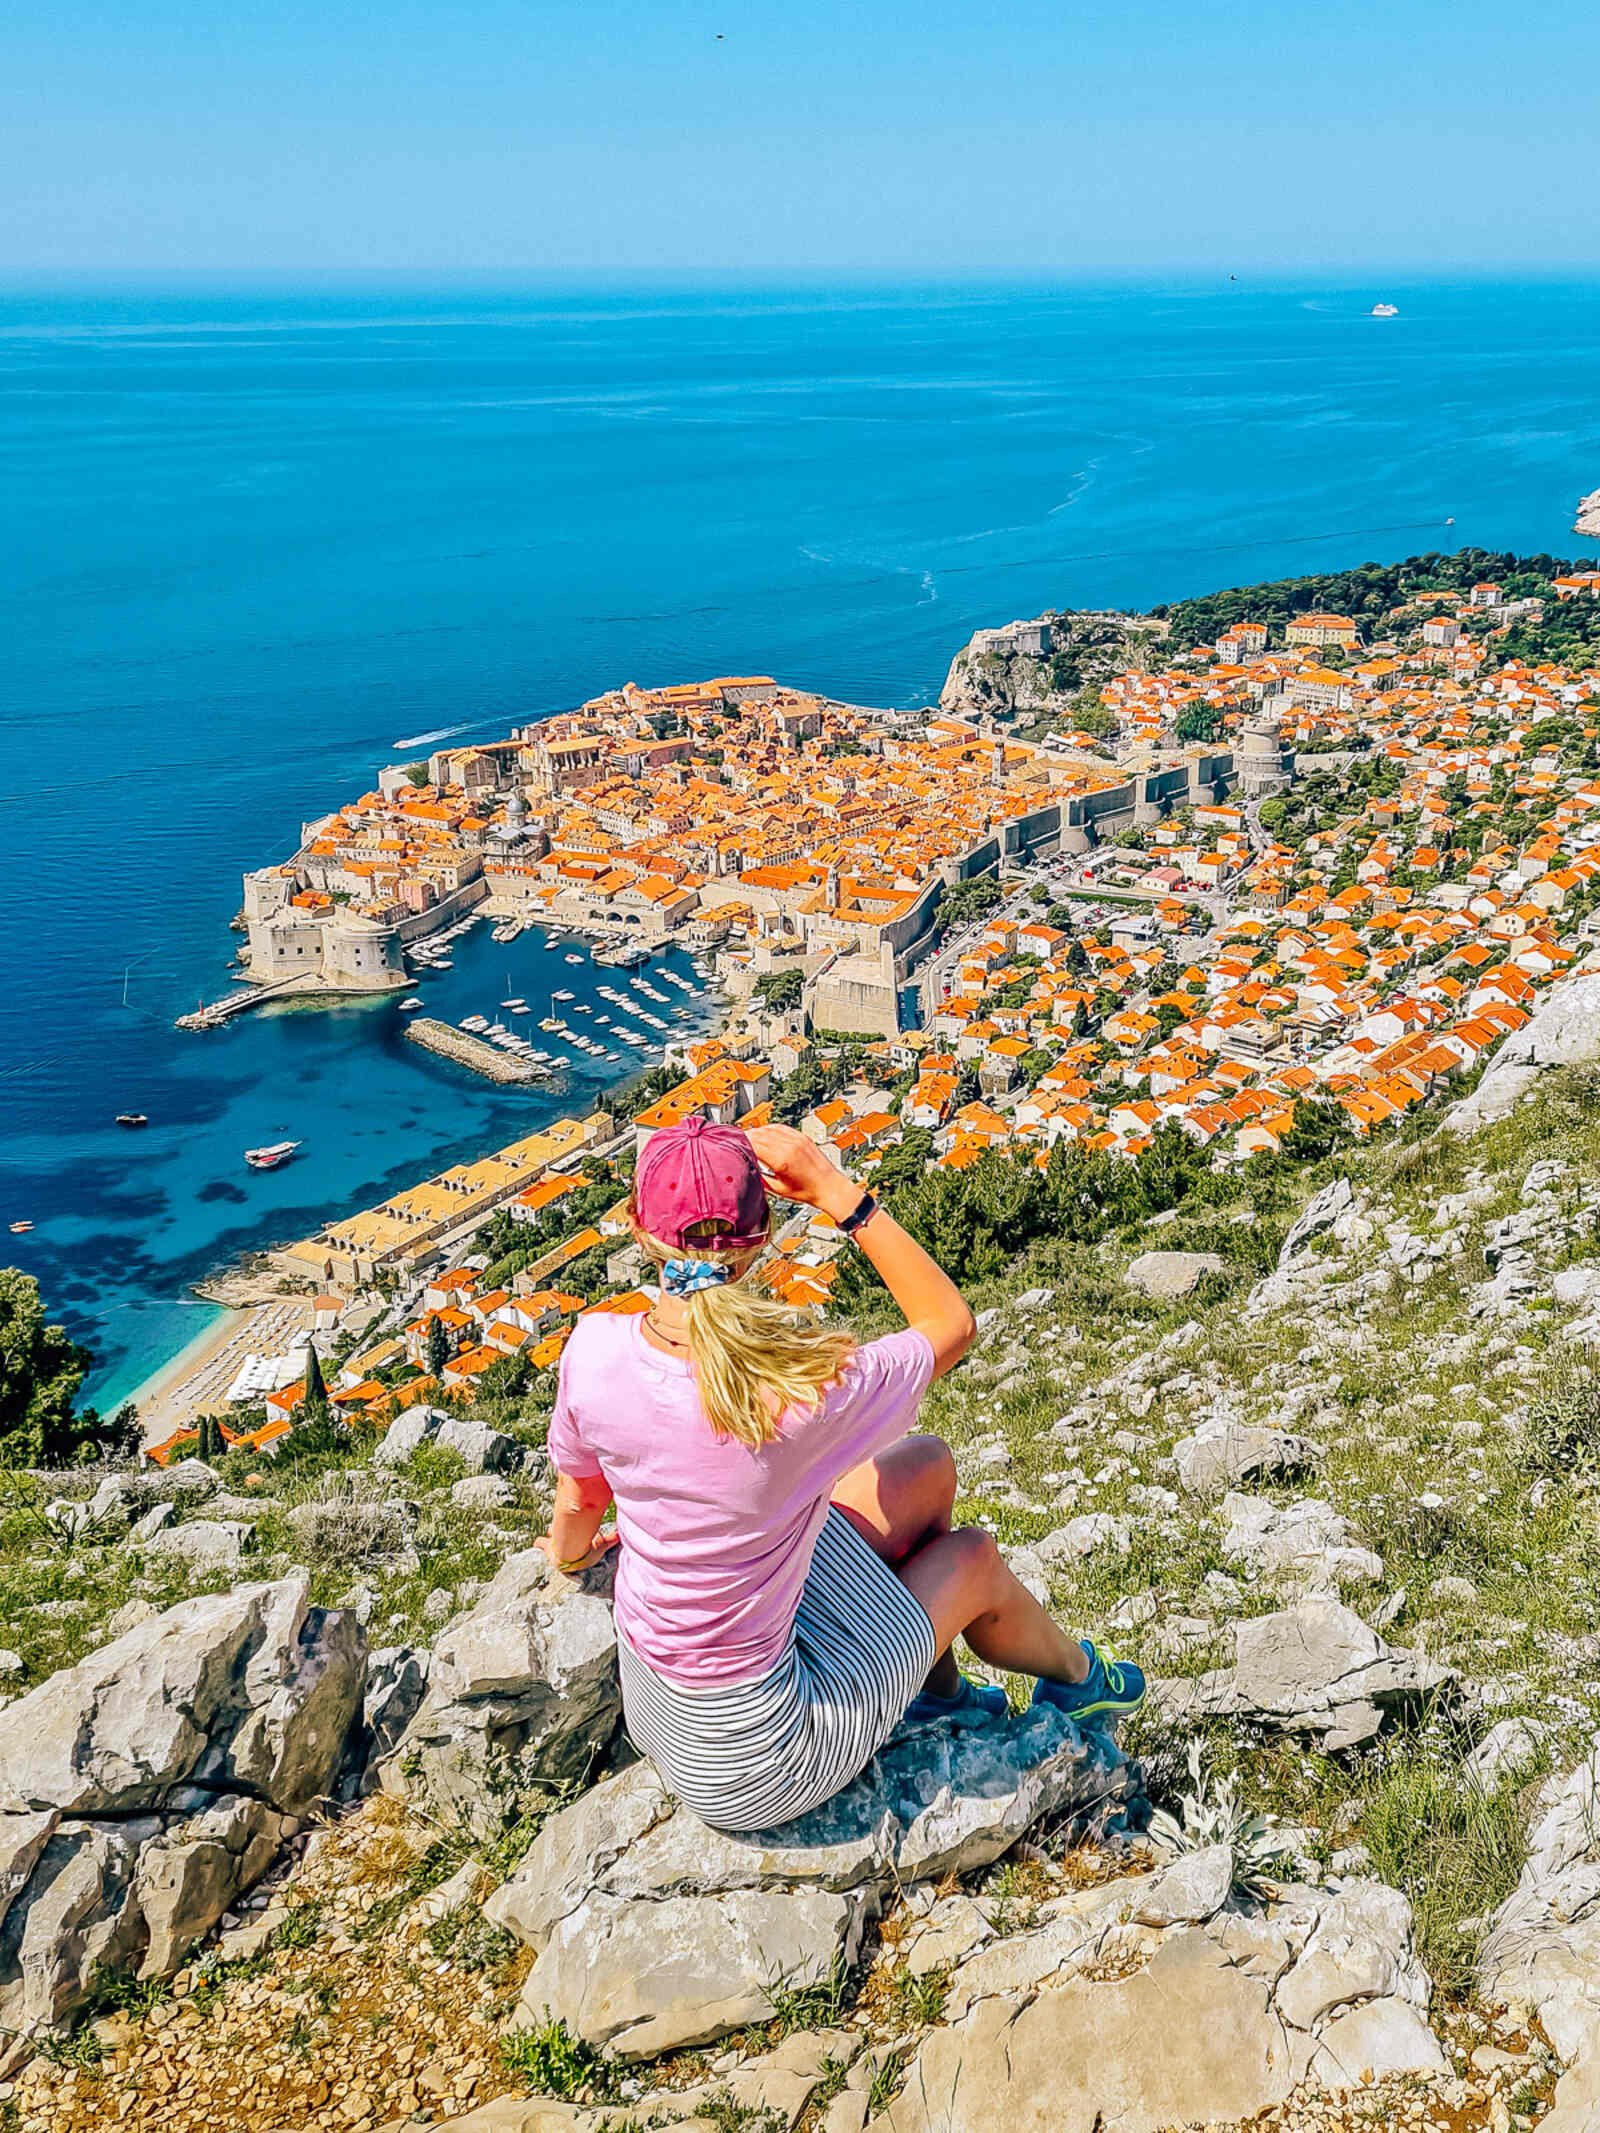 Girl in a pink shirt and hat with a stripe skirt sitting on a rock on a mountain side and looking down on the historic walled town of Dubrovnik, surrounded by blue sea